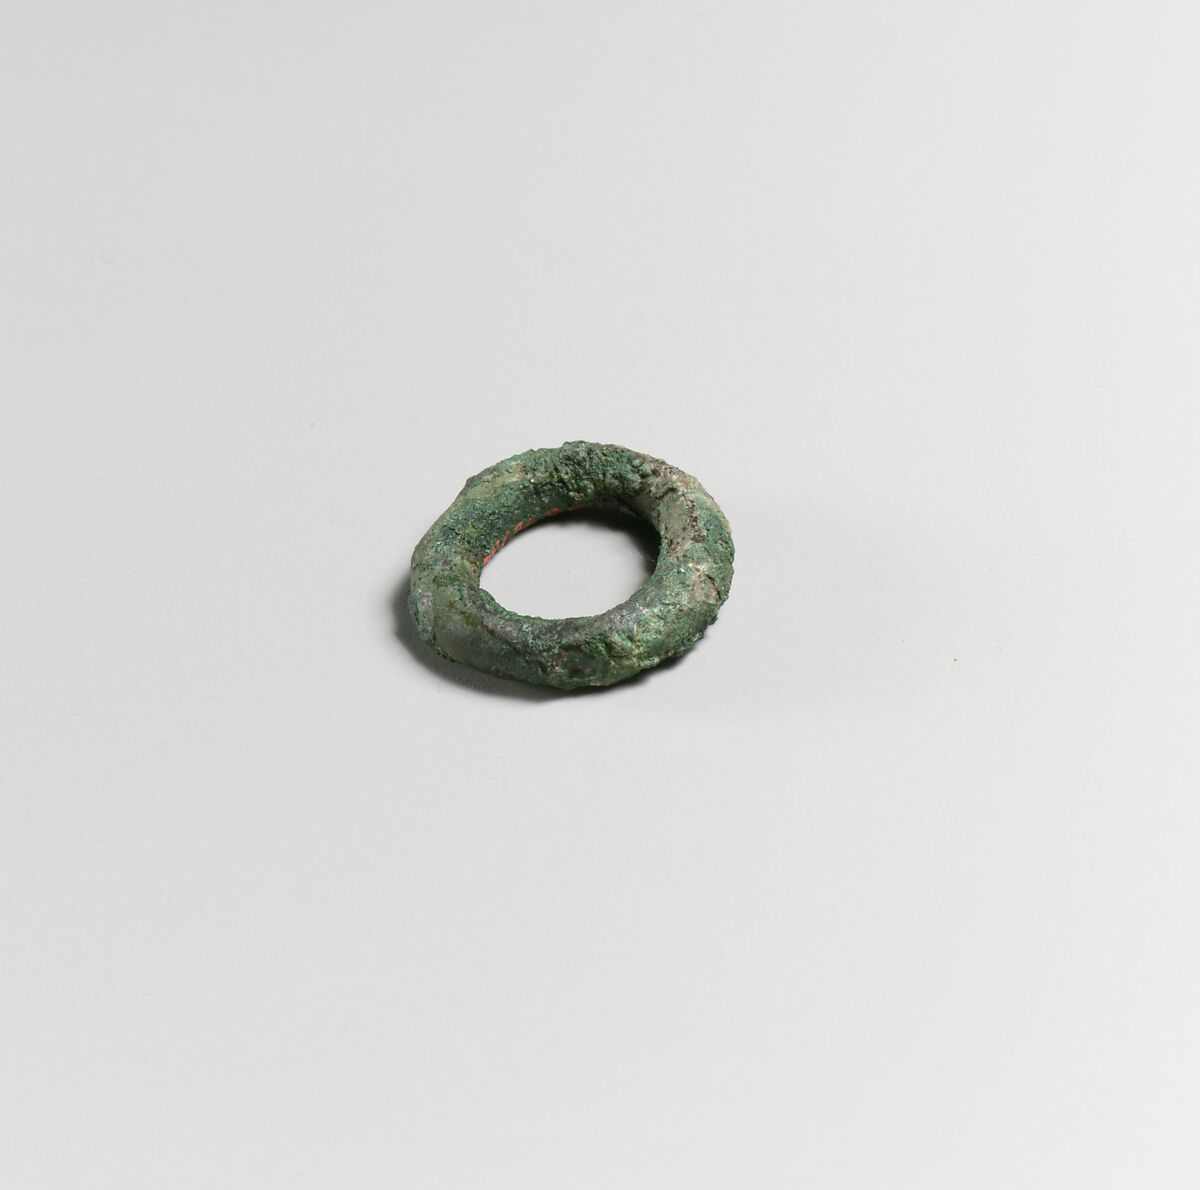 Fragments of a cart or chariot, rings, Bronze, Etruscan 